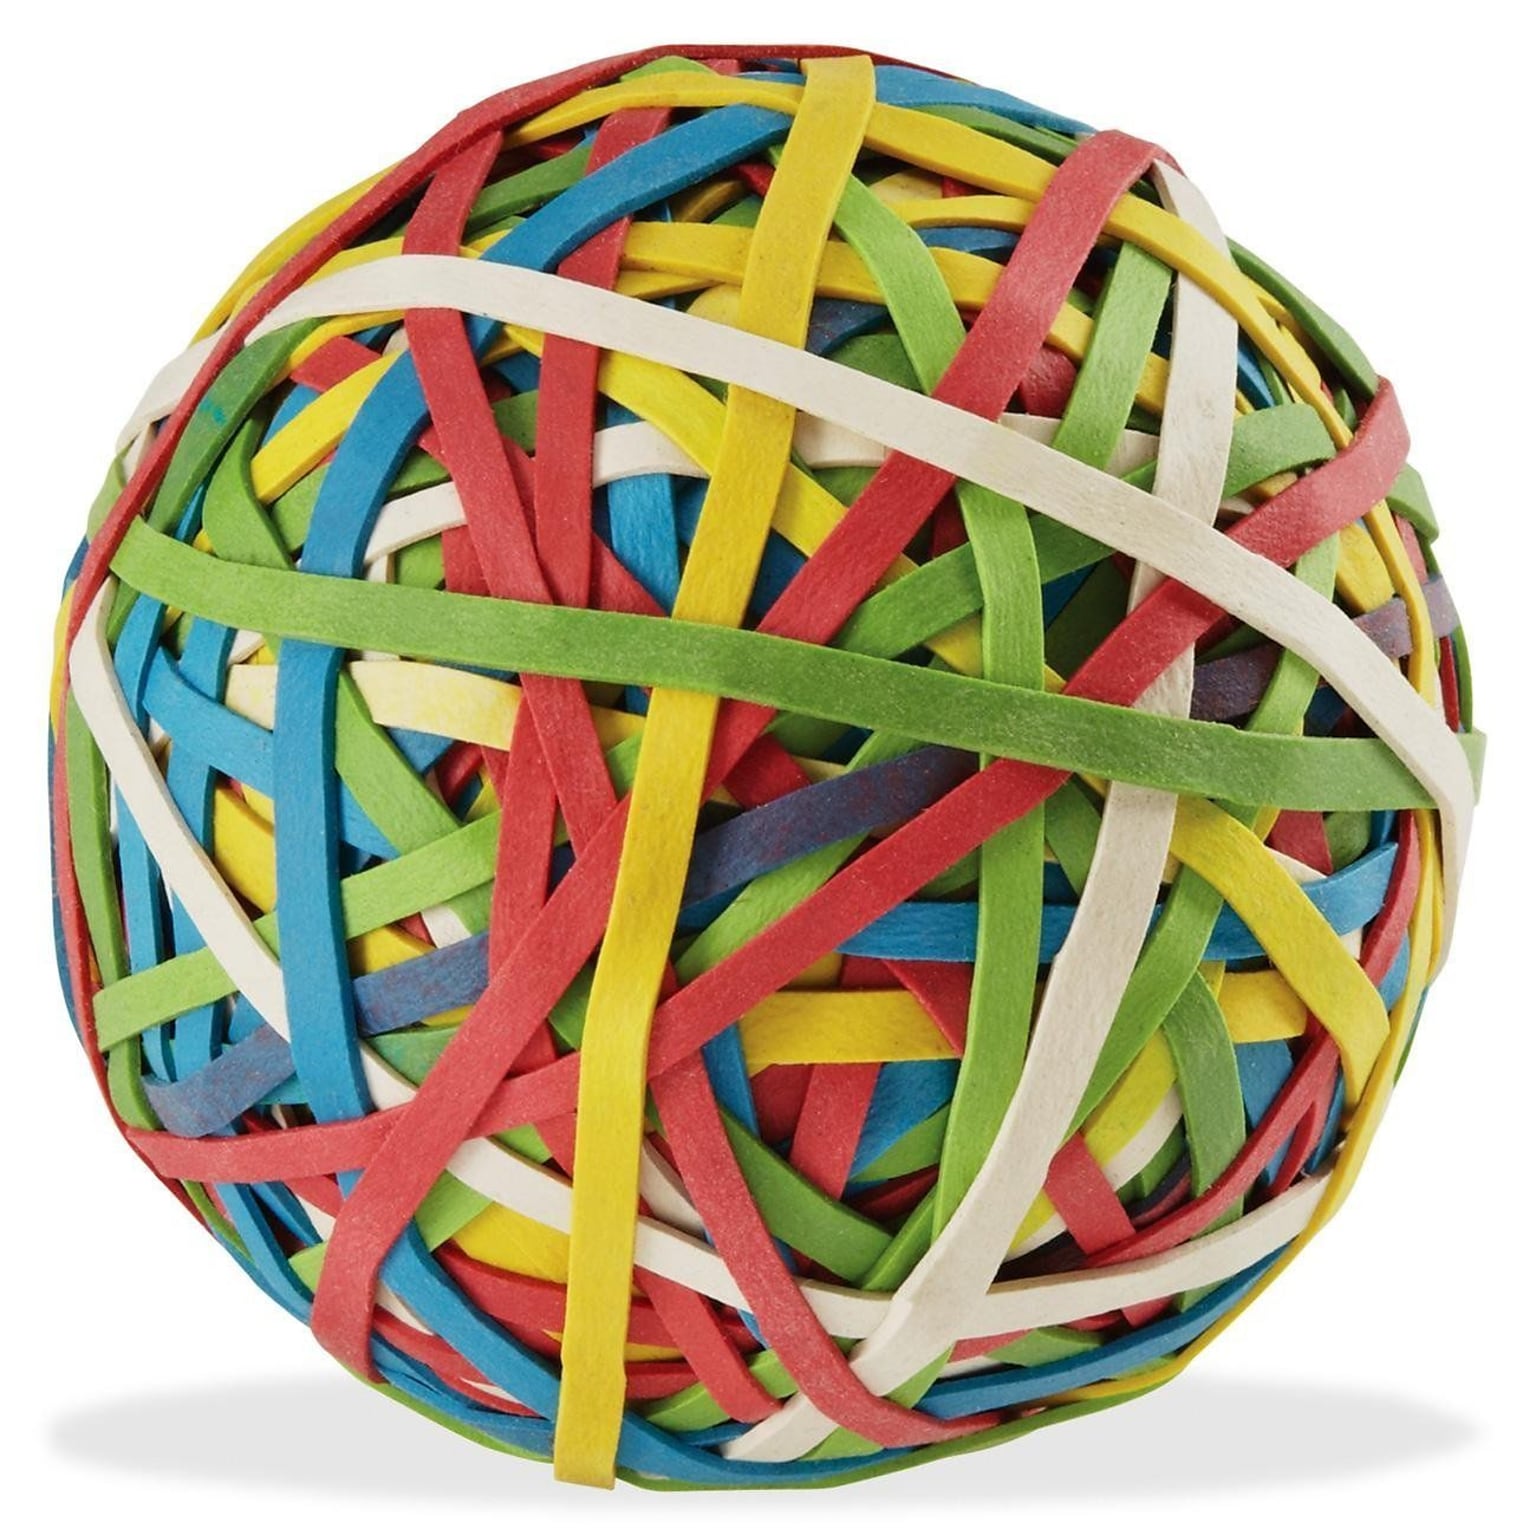 ACCO #32 Rubber Band Ball, 3 x 0.125, Latex Free, 275/Pack (A7072153)